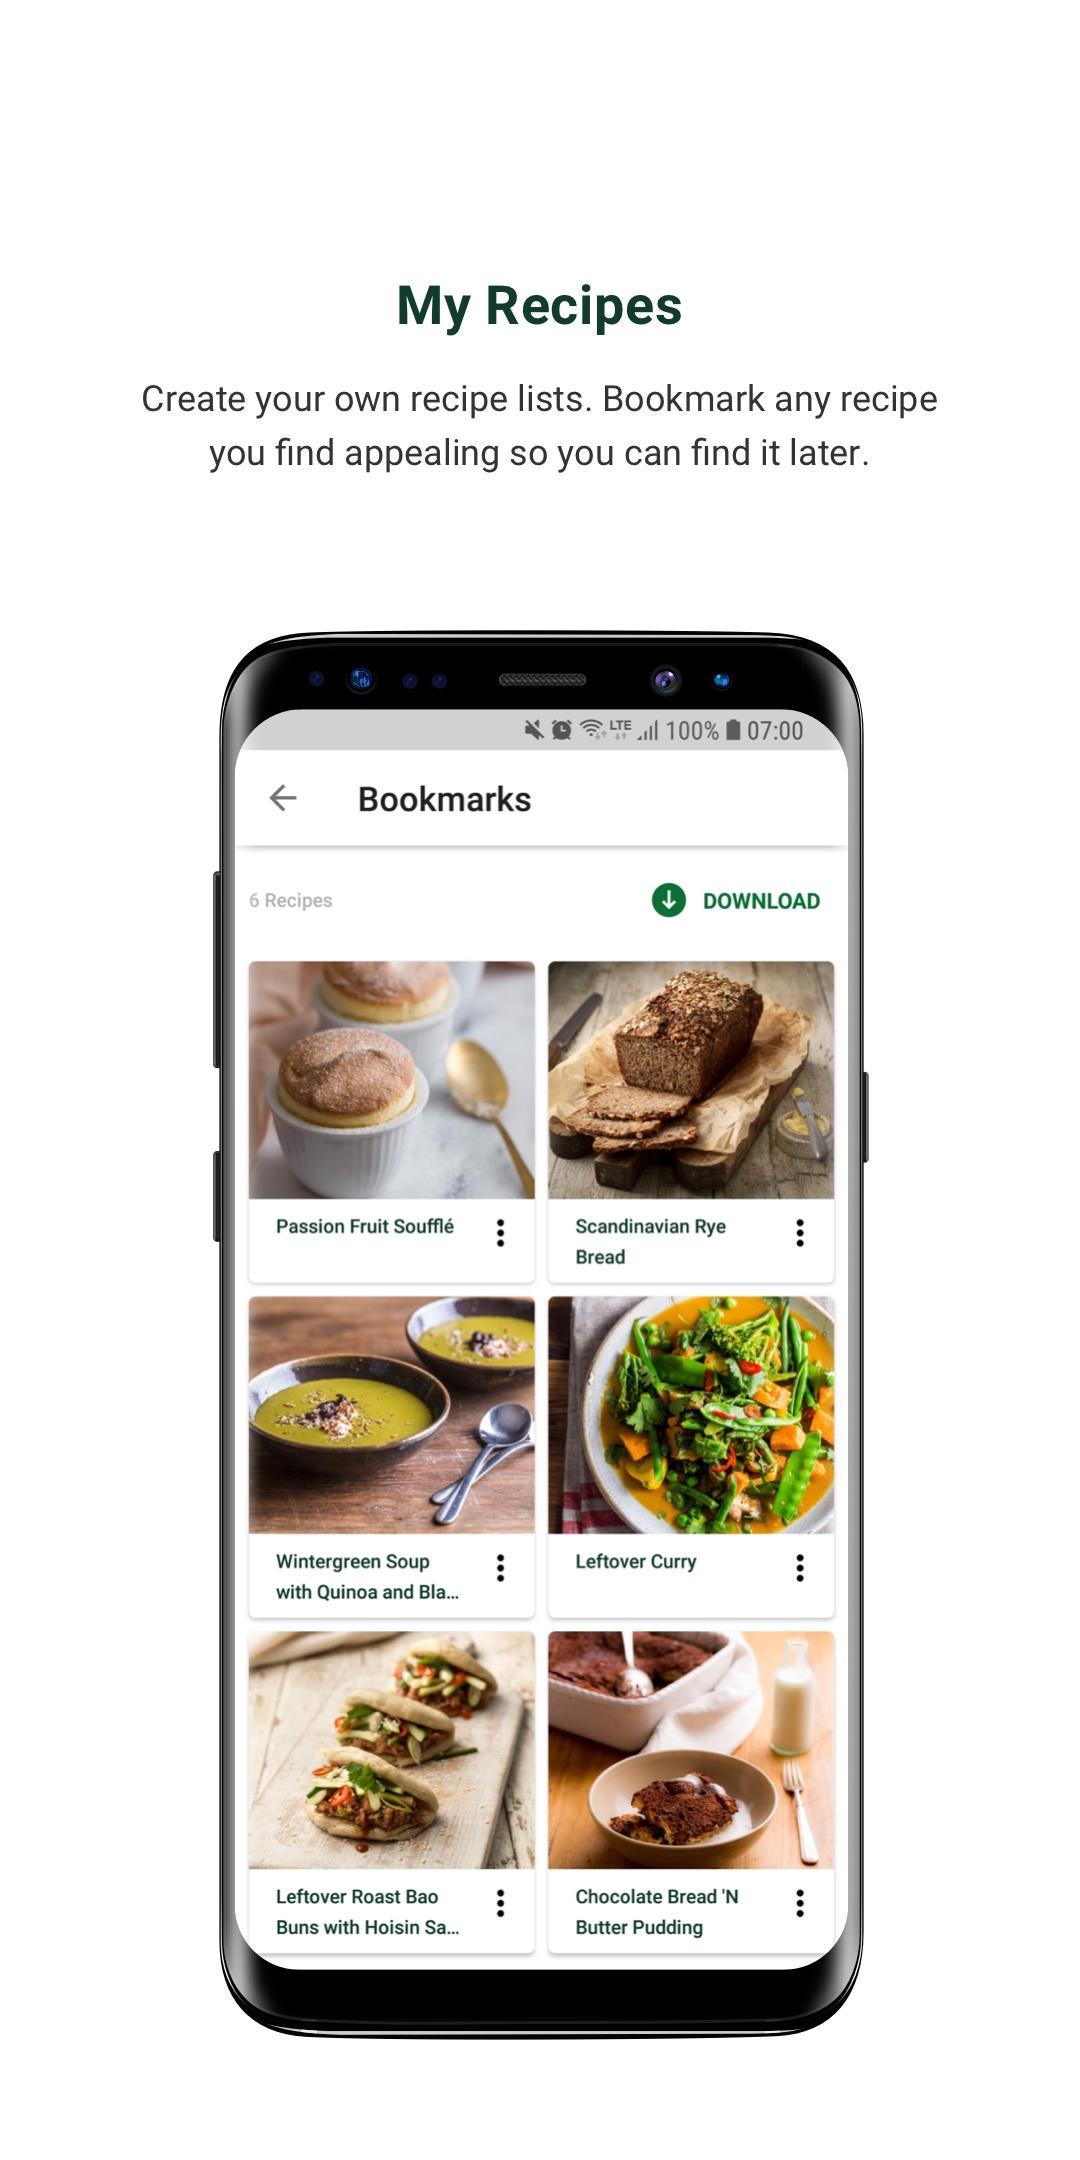 Official Thermomix Cookidoo App For Android Apk Download